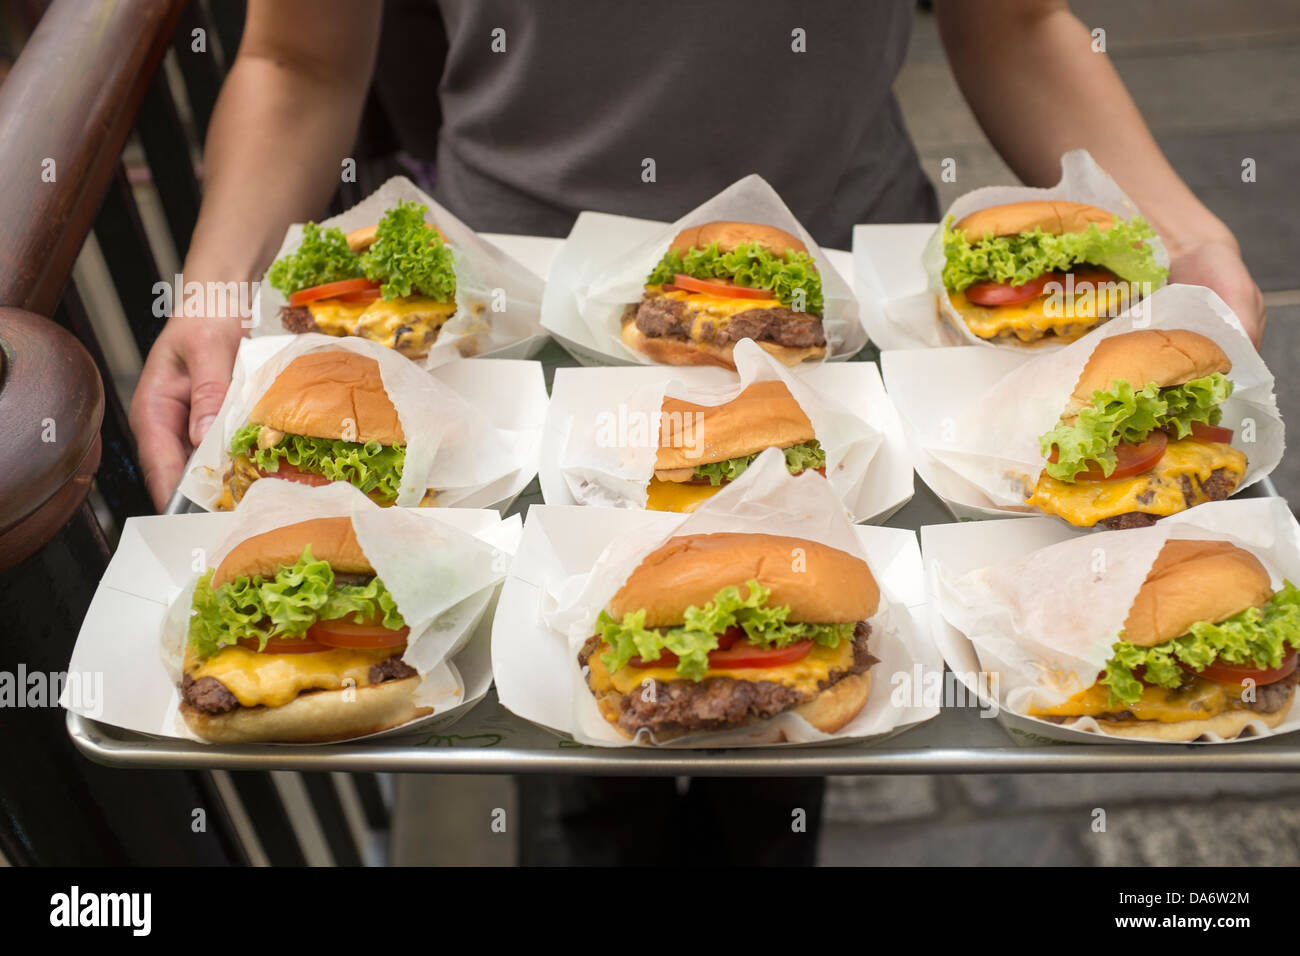 Shake Shack Burgers Covent Garden London Banque D'Images